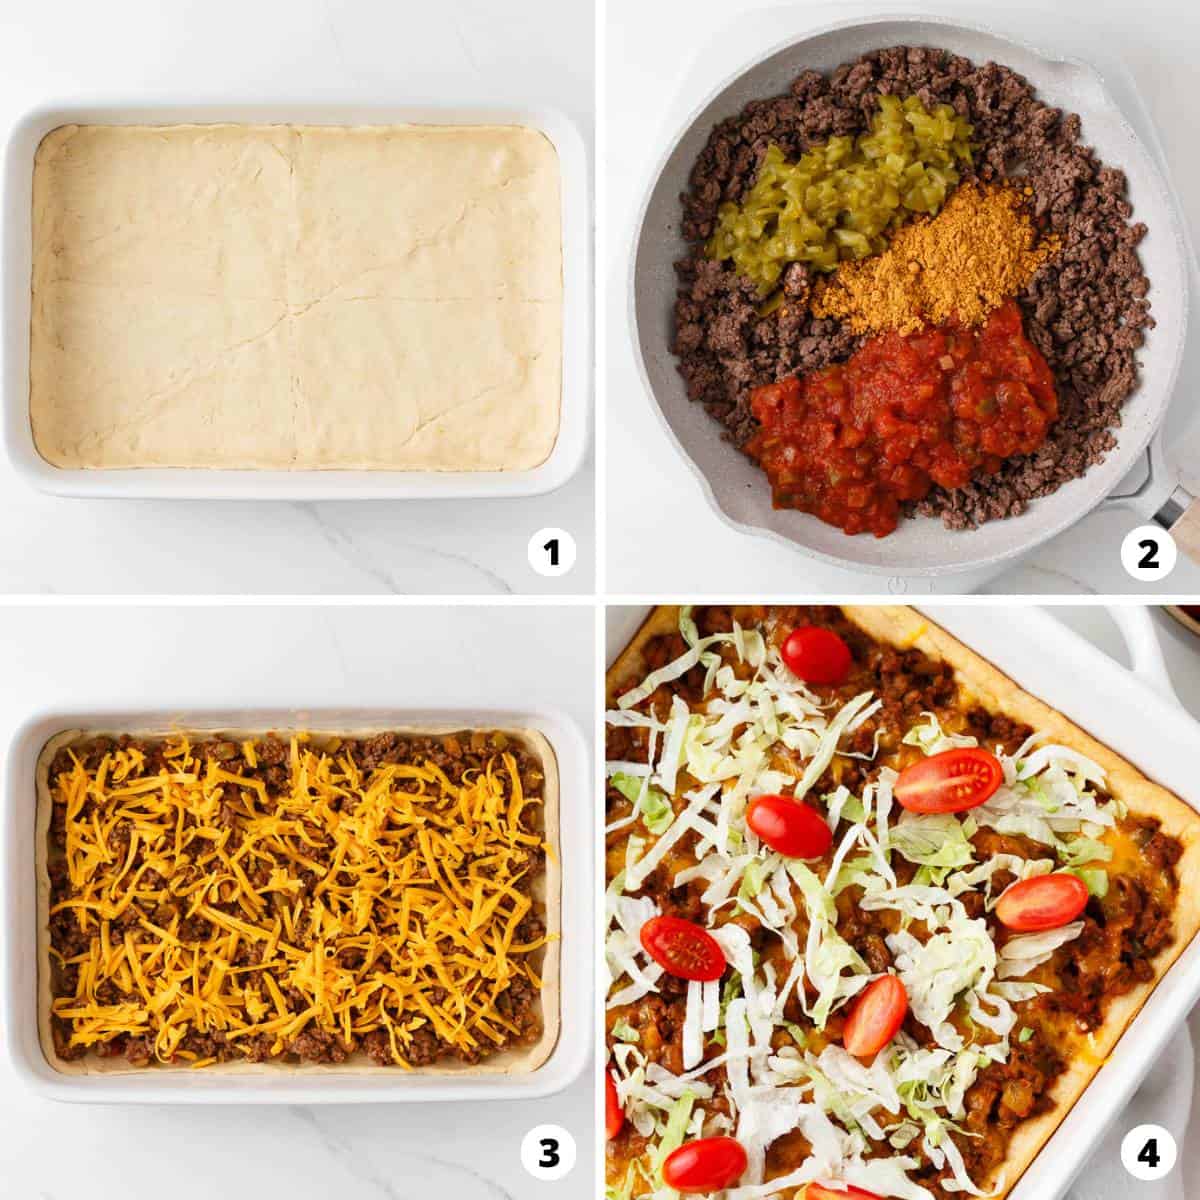 Showing how to make taco bake casserole in a 4 step collage.